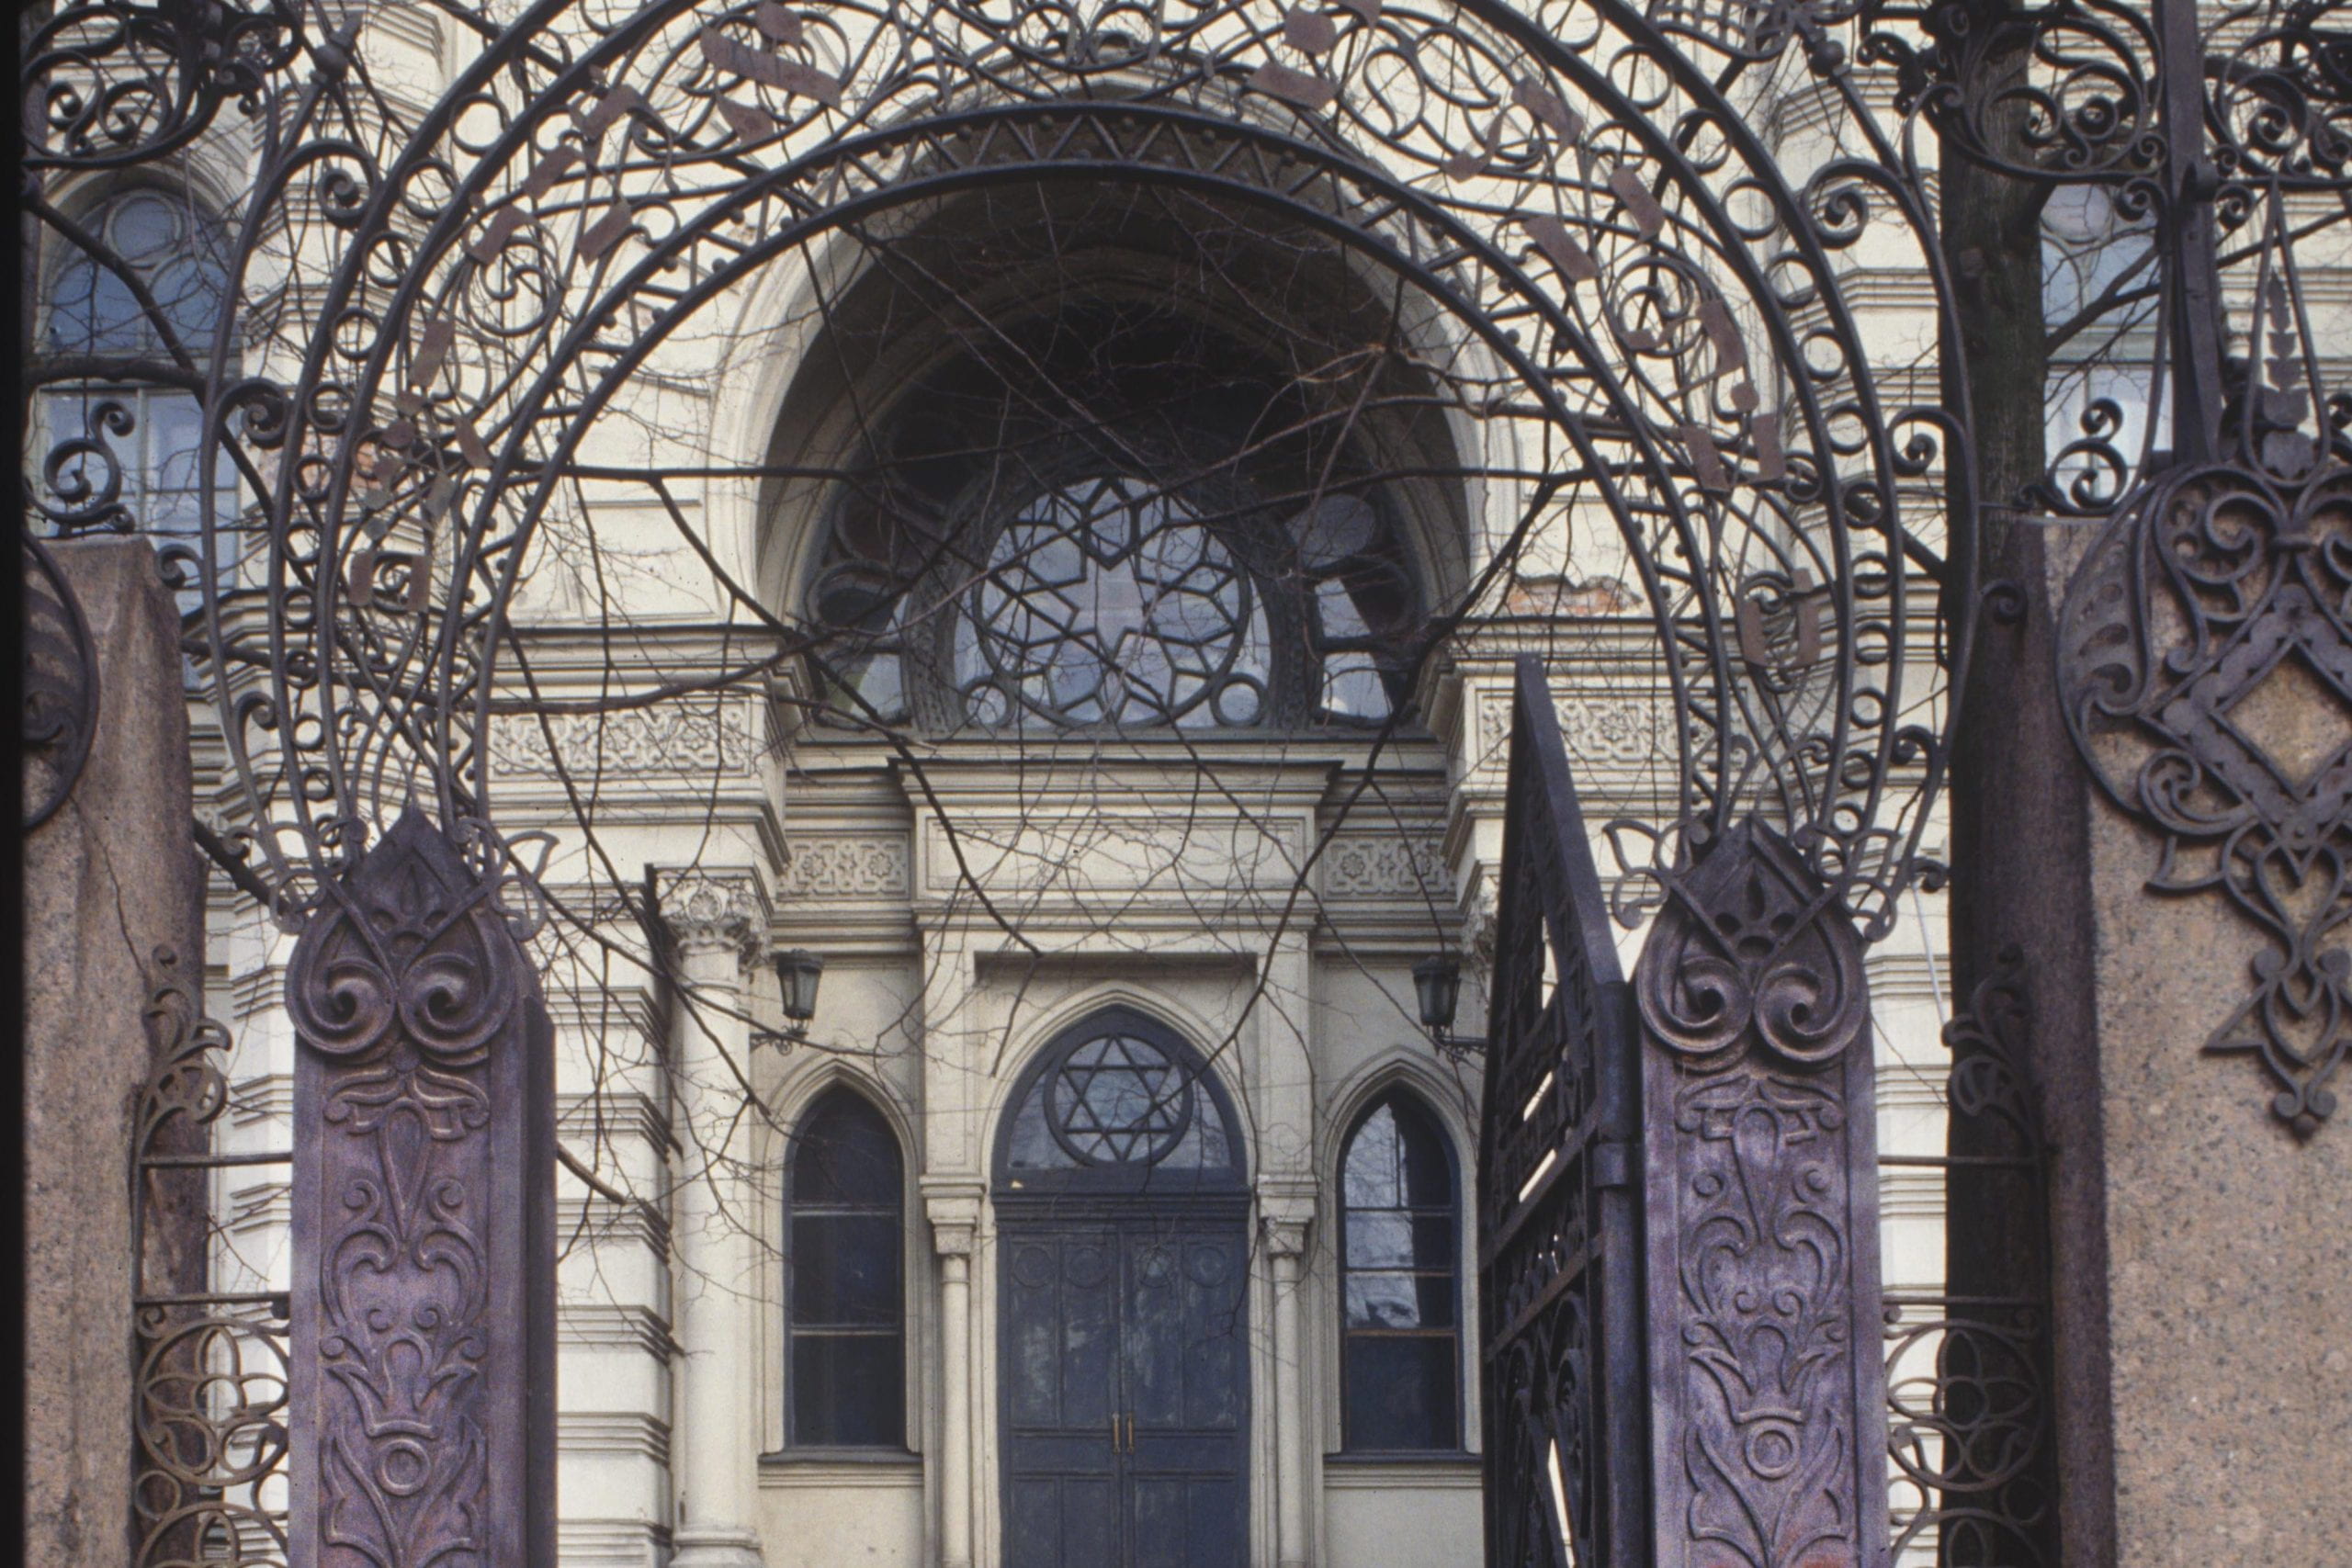 Choral Synagogue, main gate, St. Petersburg, Russia
Photo by William Brusfield